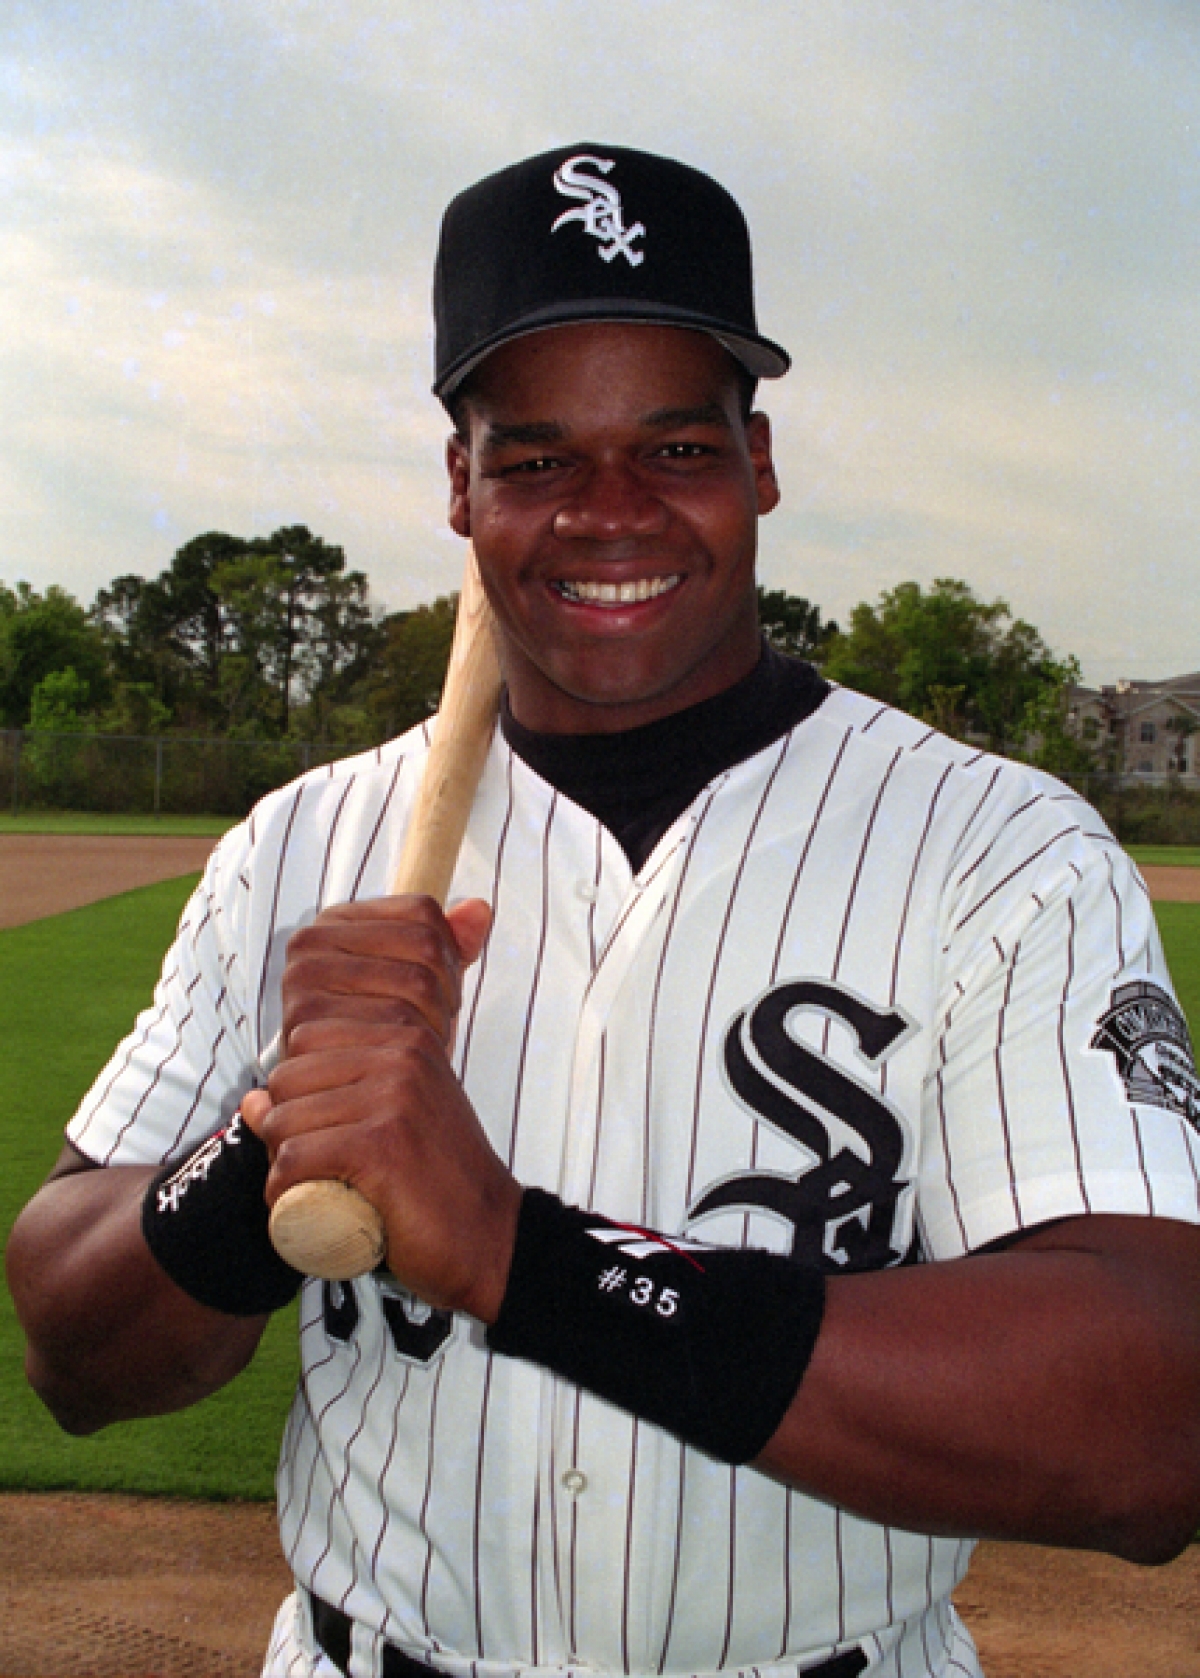 Hall of Famer Frank Thomas has bought controlling interest in “Field of  Dreams” site